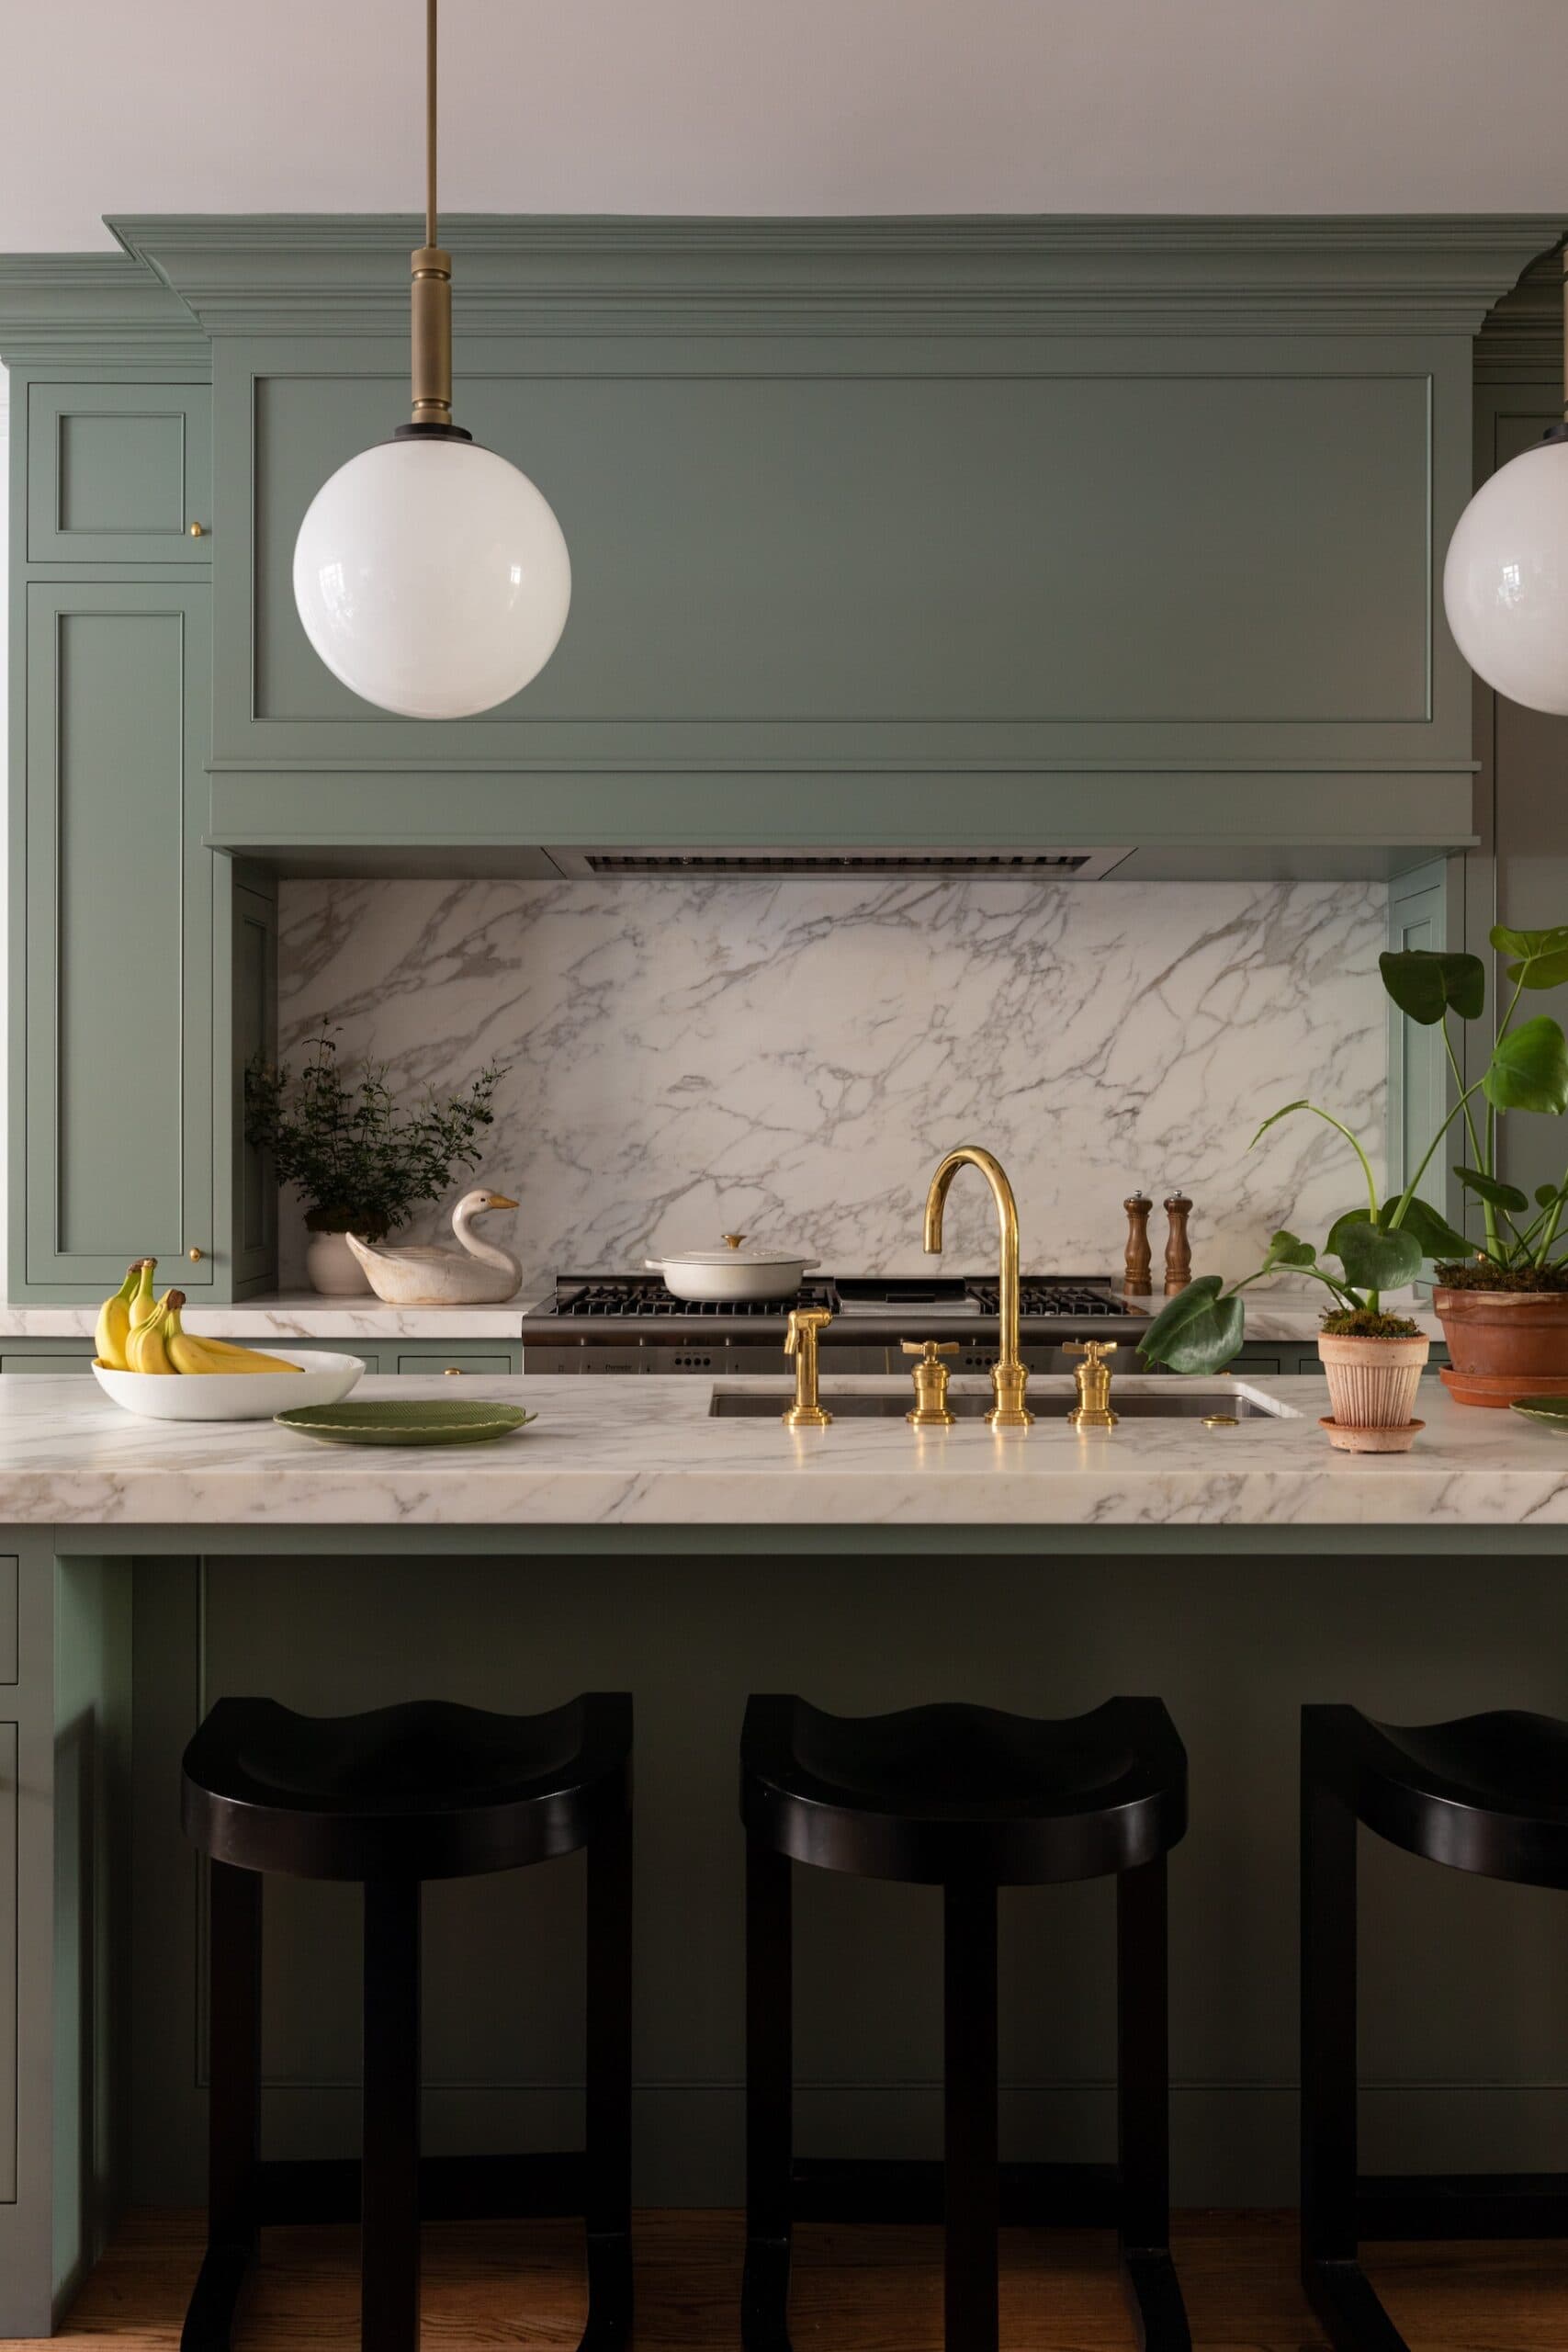 Fresh young design with mid century green style kitchen by Alexandra Kaehler.